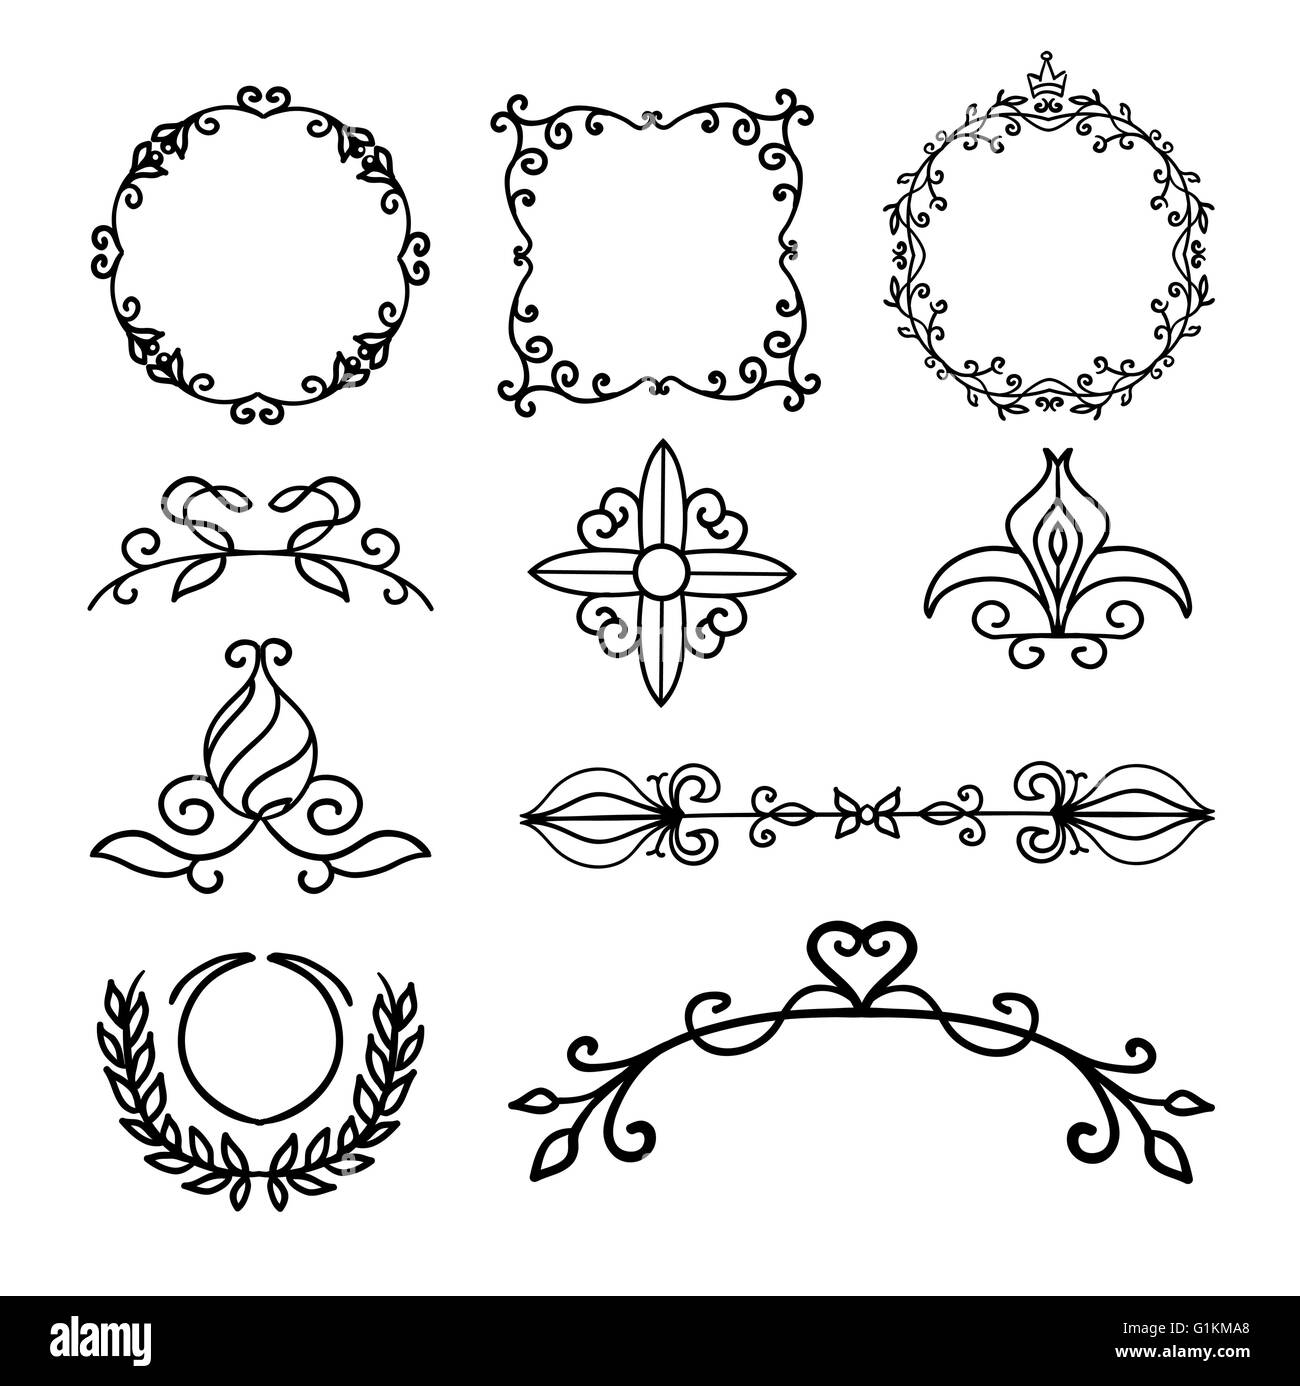 Hand drawn decoration elements, frames, page divider and border  vector illustration with all separated elements for your design Stock Vector